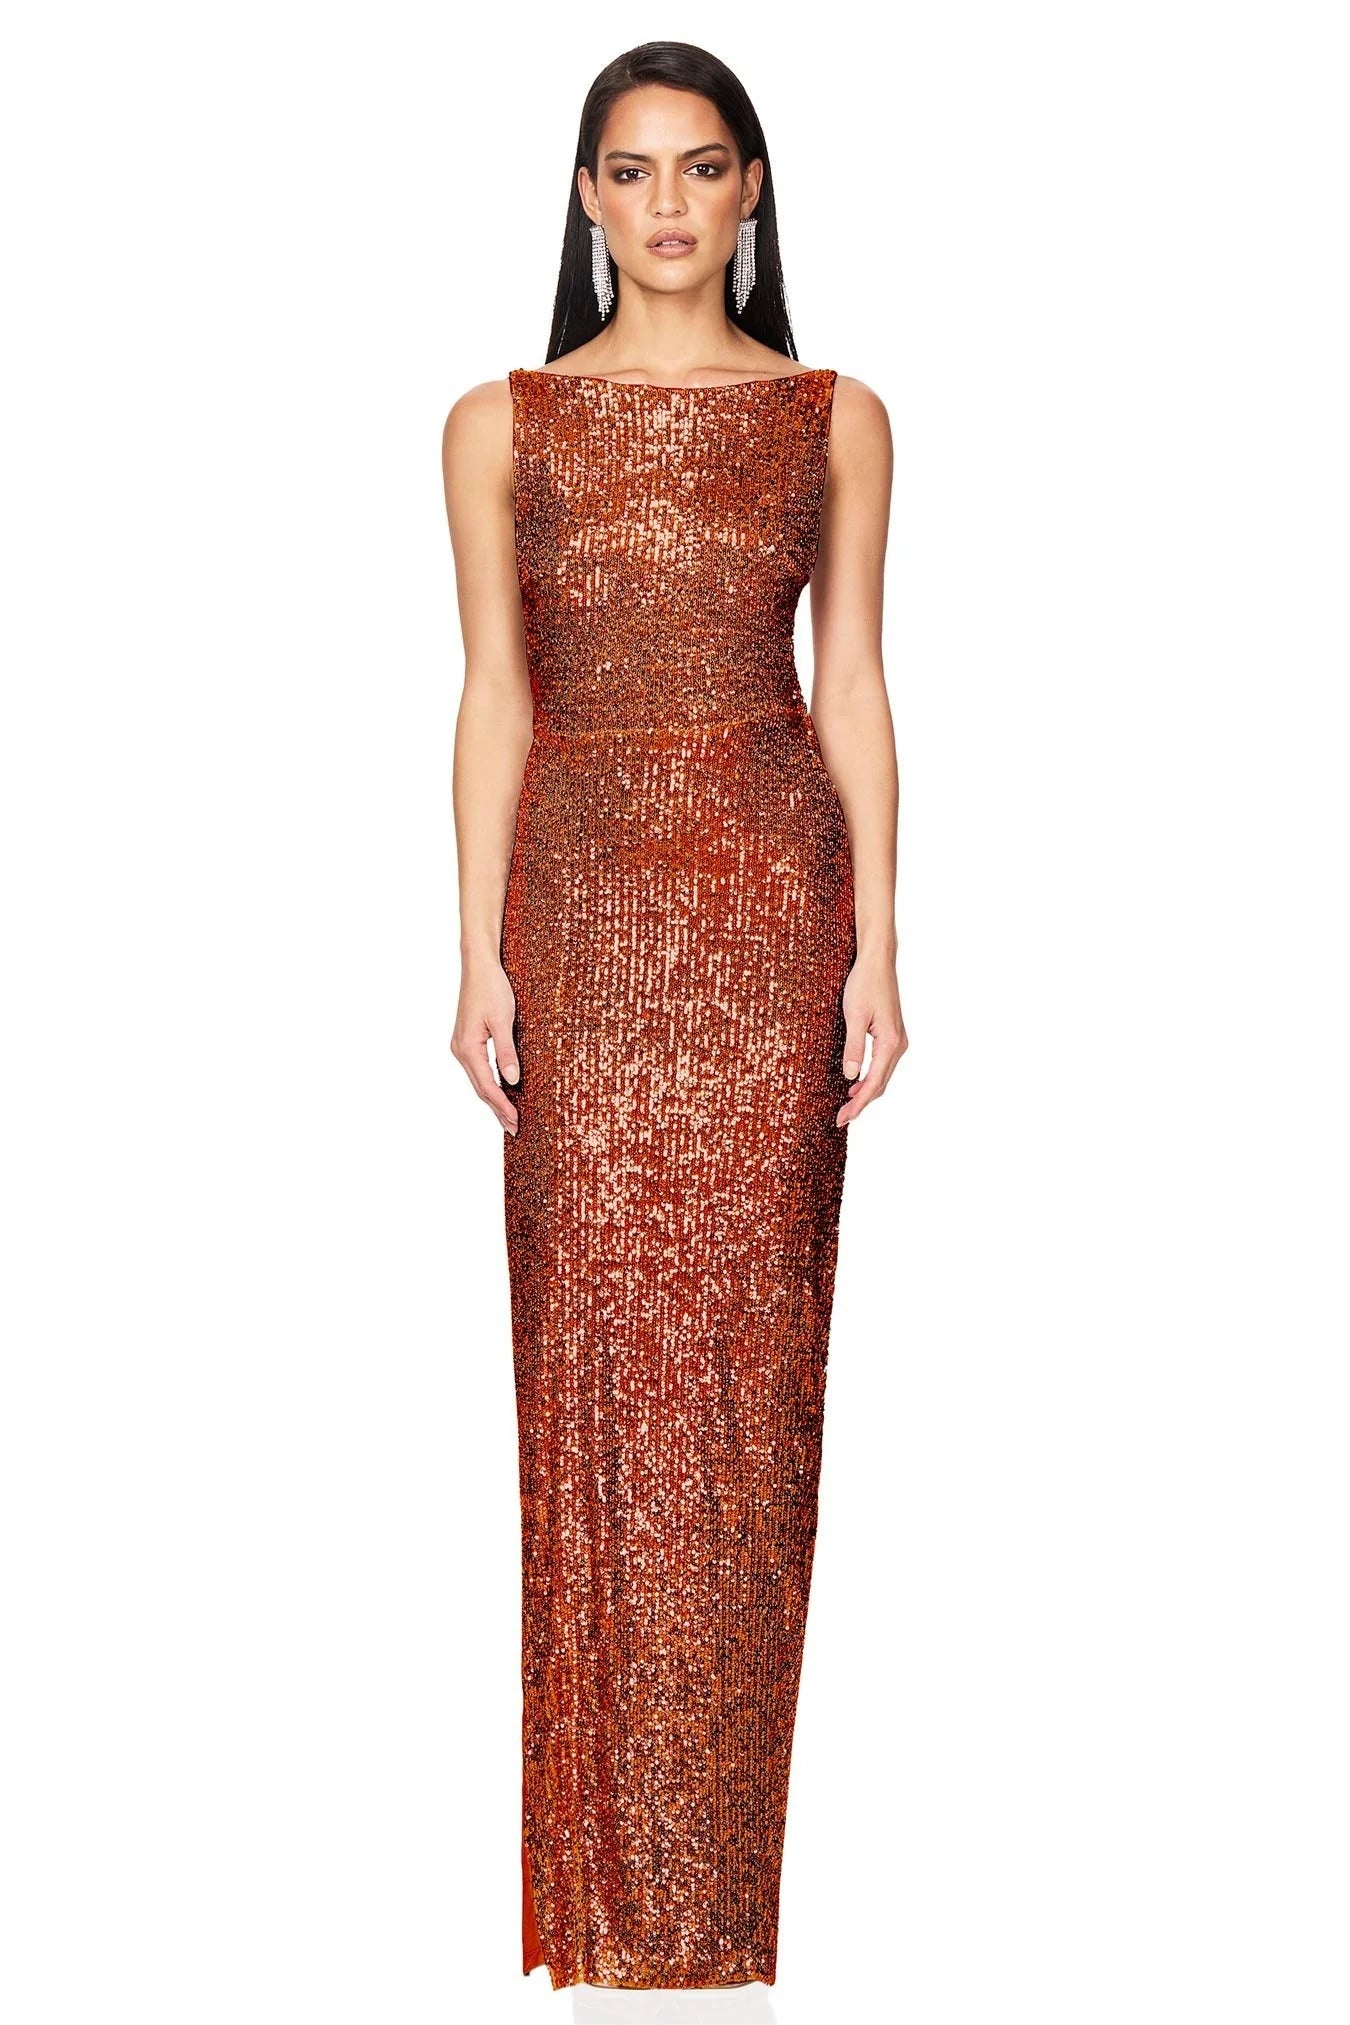 Lumina Gown - Toffee